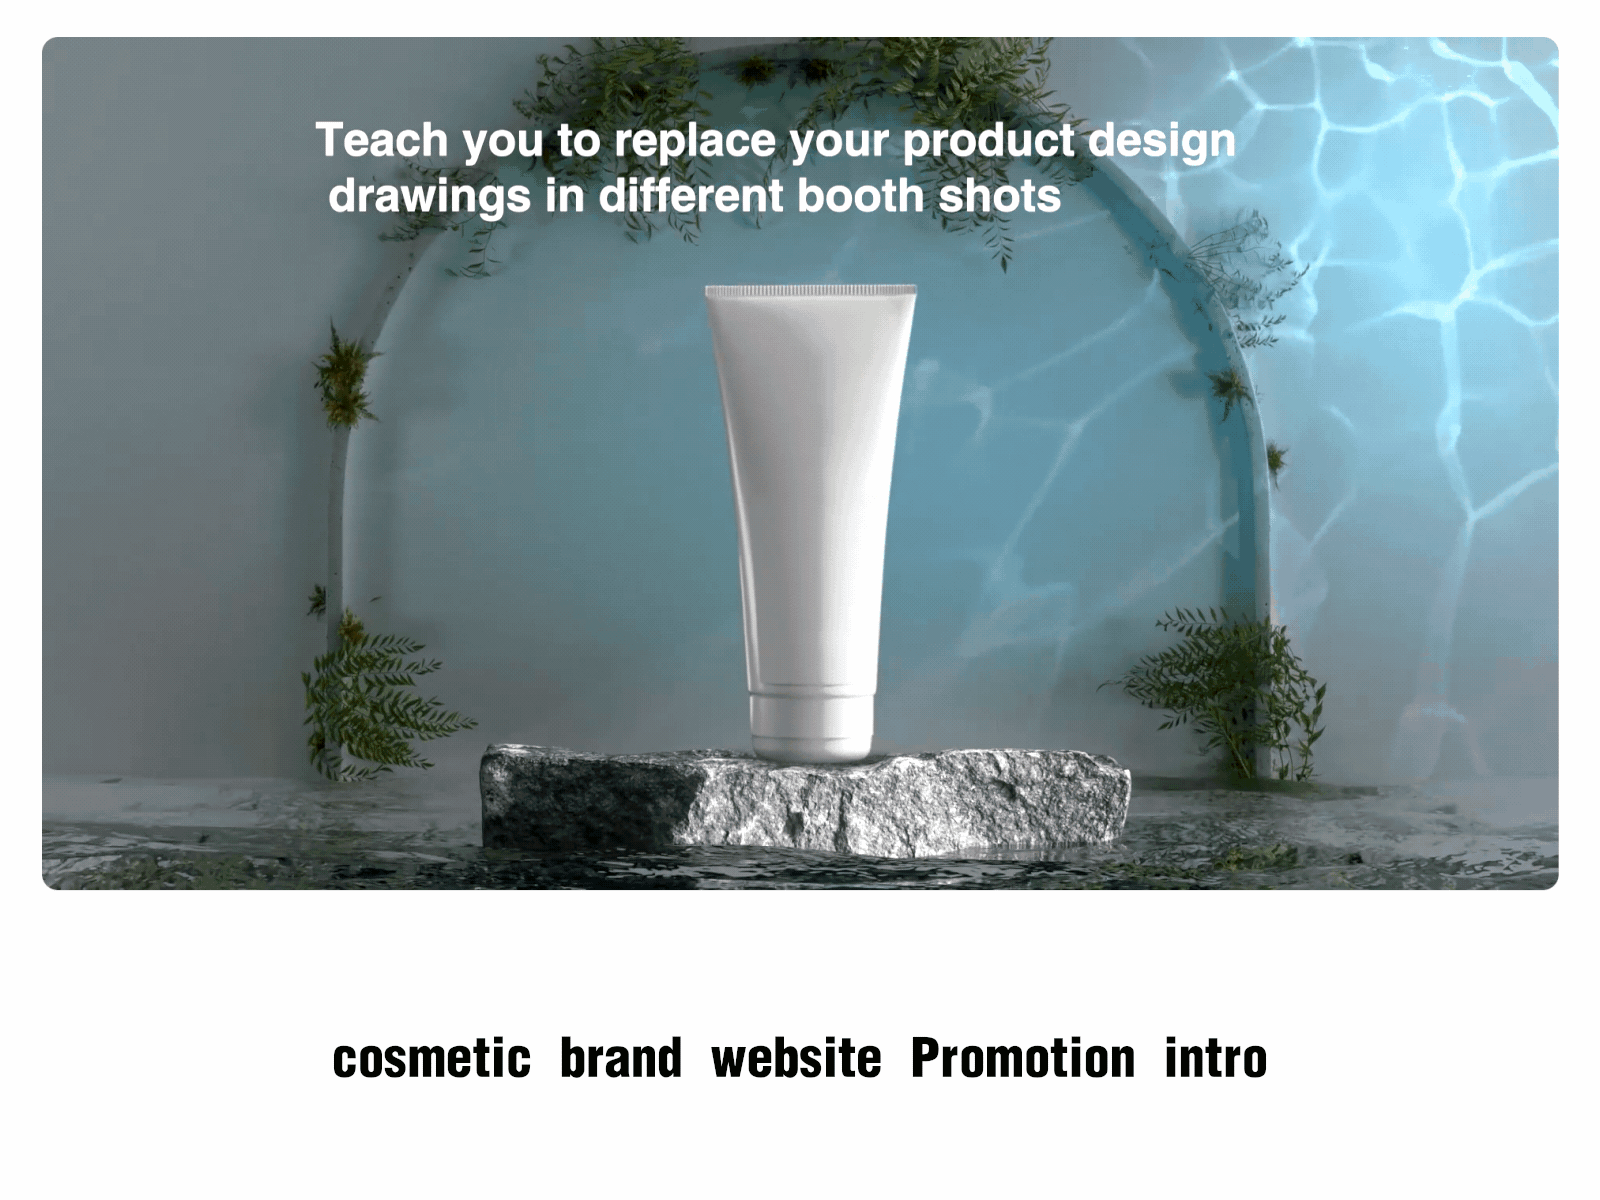 cosmetic brand website Promotion intro